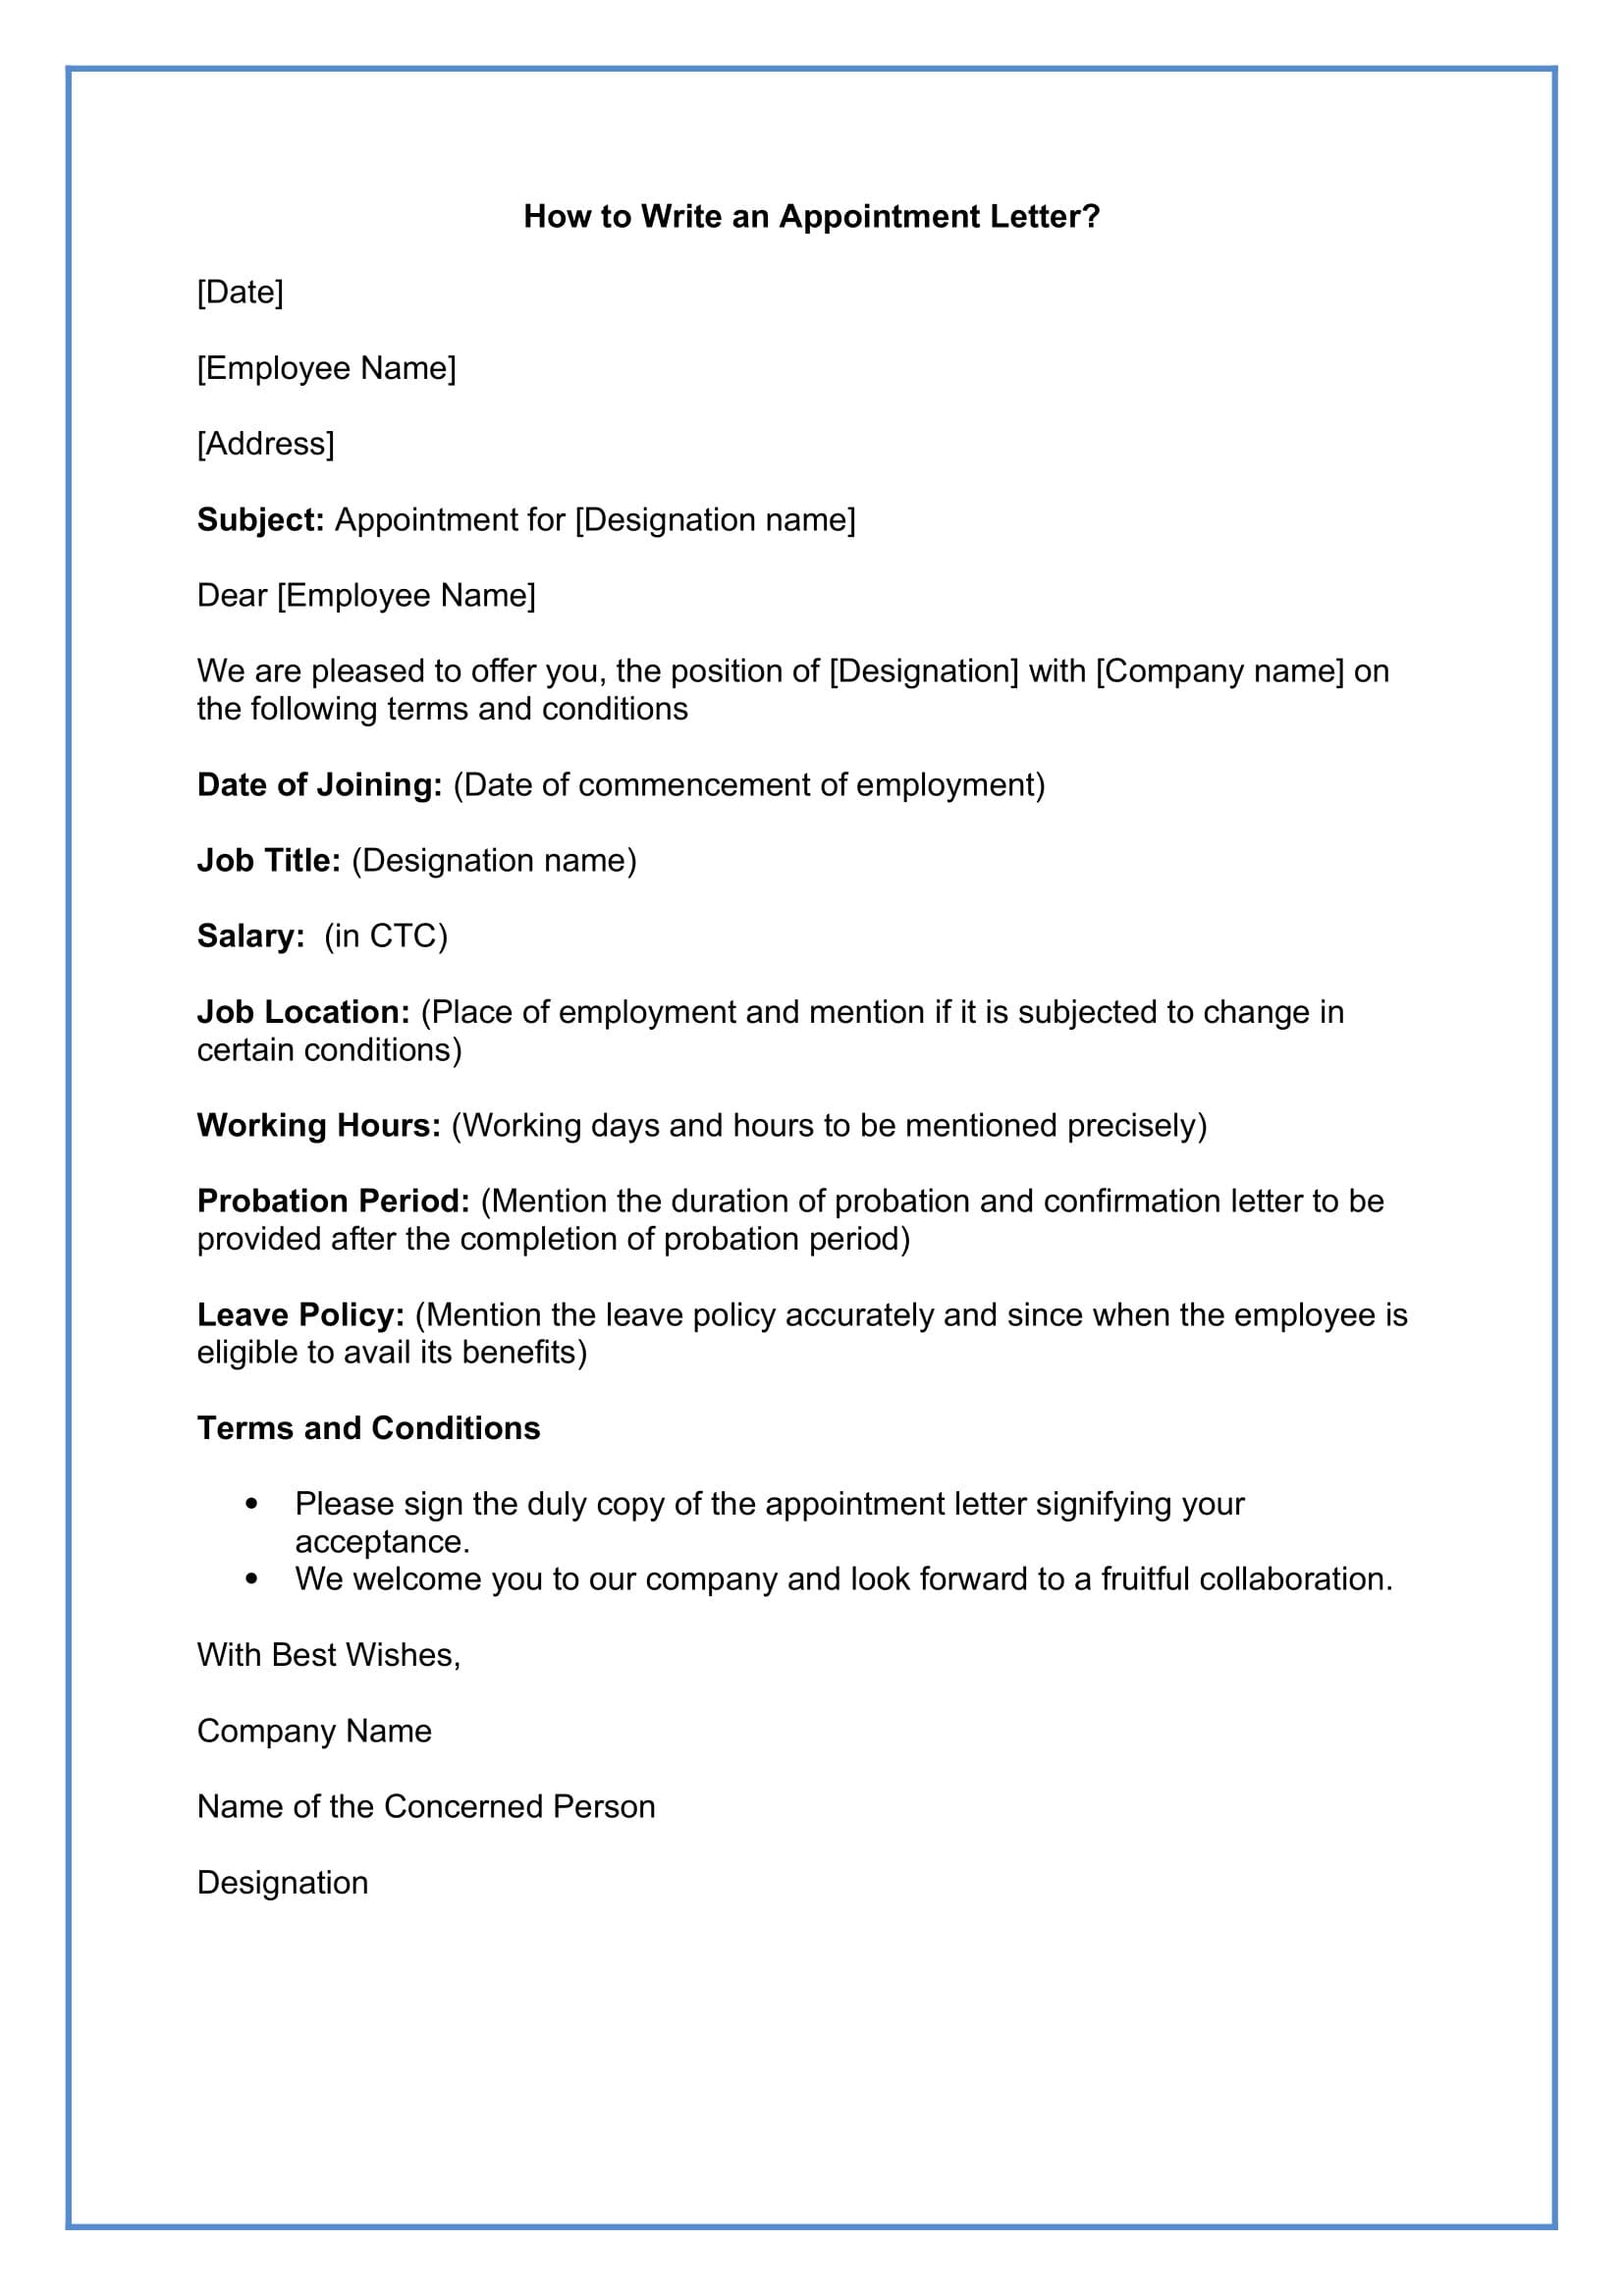 Appointment Letter | Job Appointment Letter Format, Sample Appointment  Letter, Templates - A Plus Topper